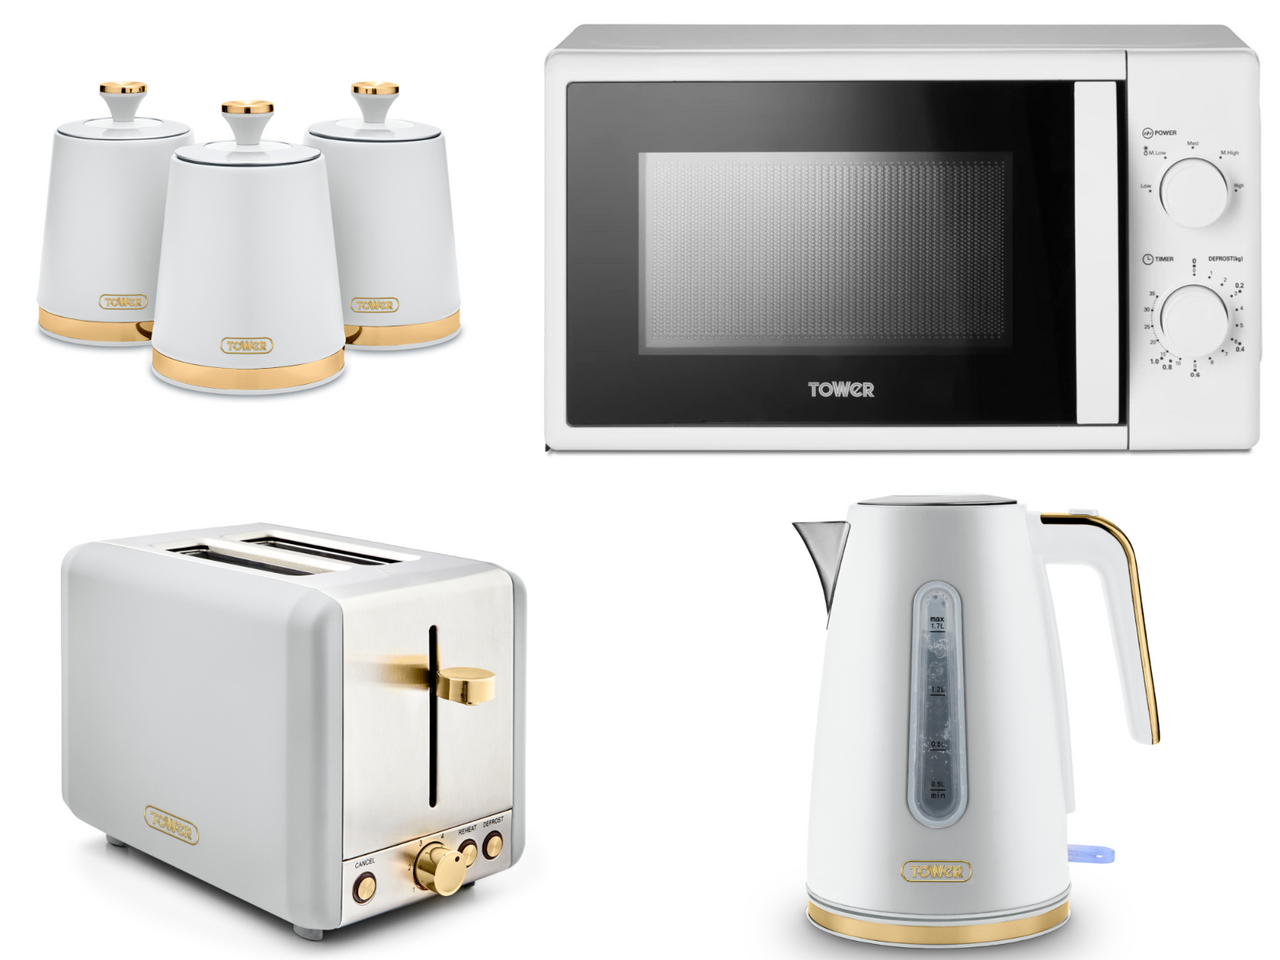 Tower Cavaletto White 1.7L 3KW Jug Kettle, 2 Slice Toaster, T24034WHT 700W 20L Manual Microwave & Tea, Coffee, Sugar Canisters. Contemporary Matching Kitchen Set of 6